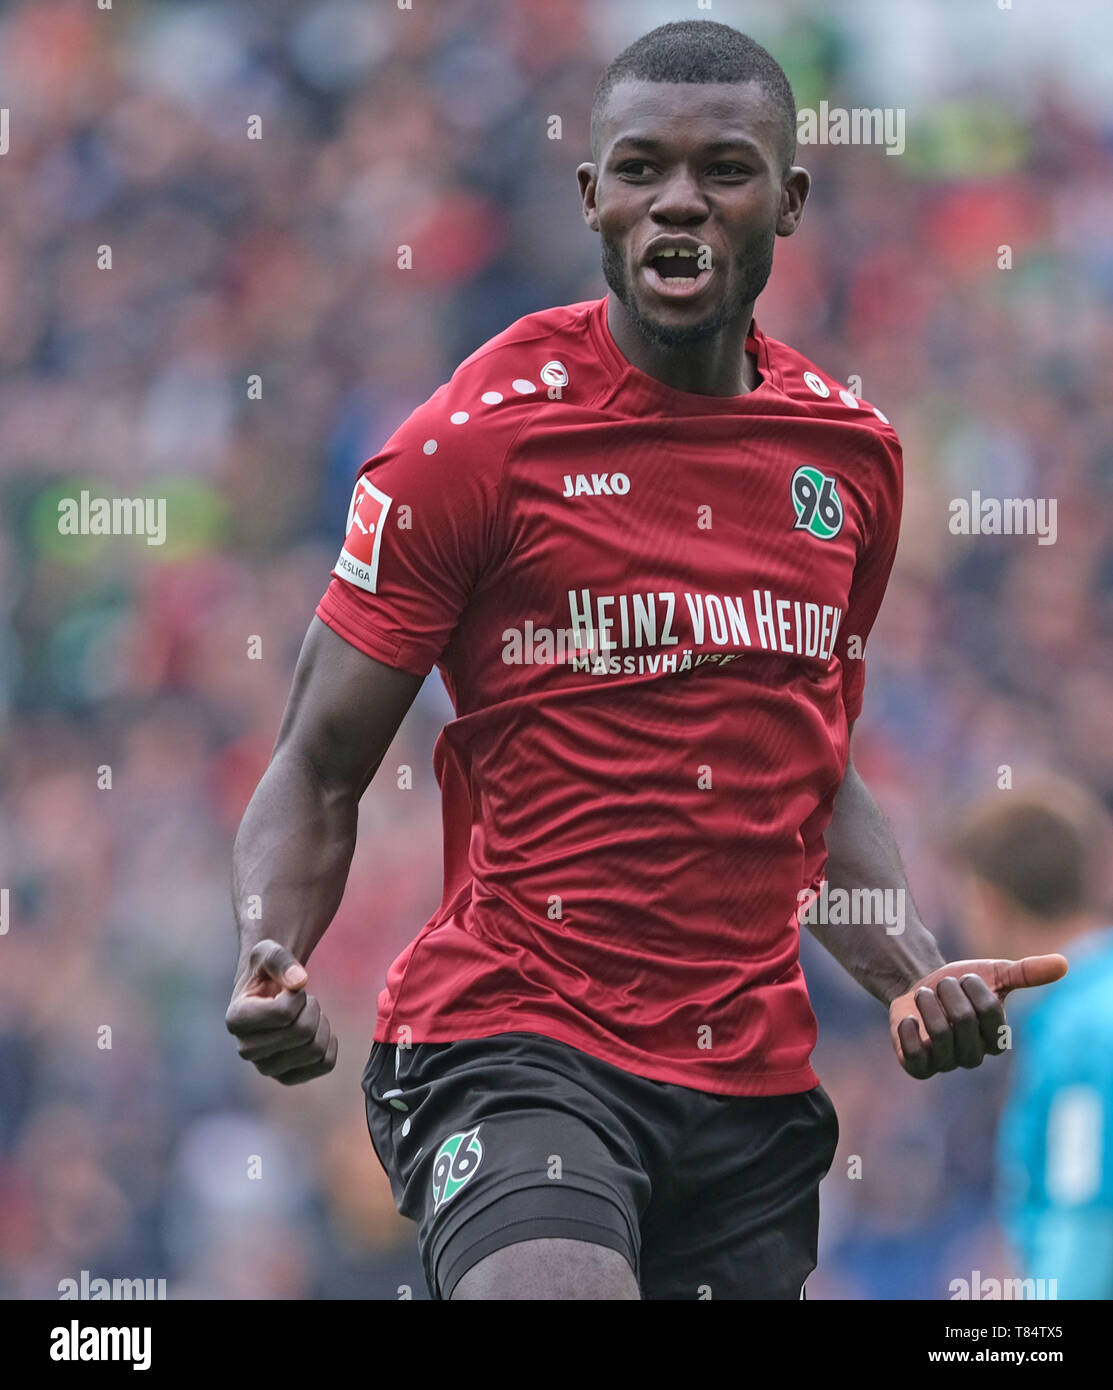 Hanover, Germany. 11th May, 2019. Soccer: Bundesliga, 33rd matchday:  Hannover 96 - SC Freiburg in der HDI-Arena in Hannover. Hanover's Ihlas  Bebou cheers for his 2-0 goal against SC Freiburg. Credit: Peter